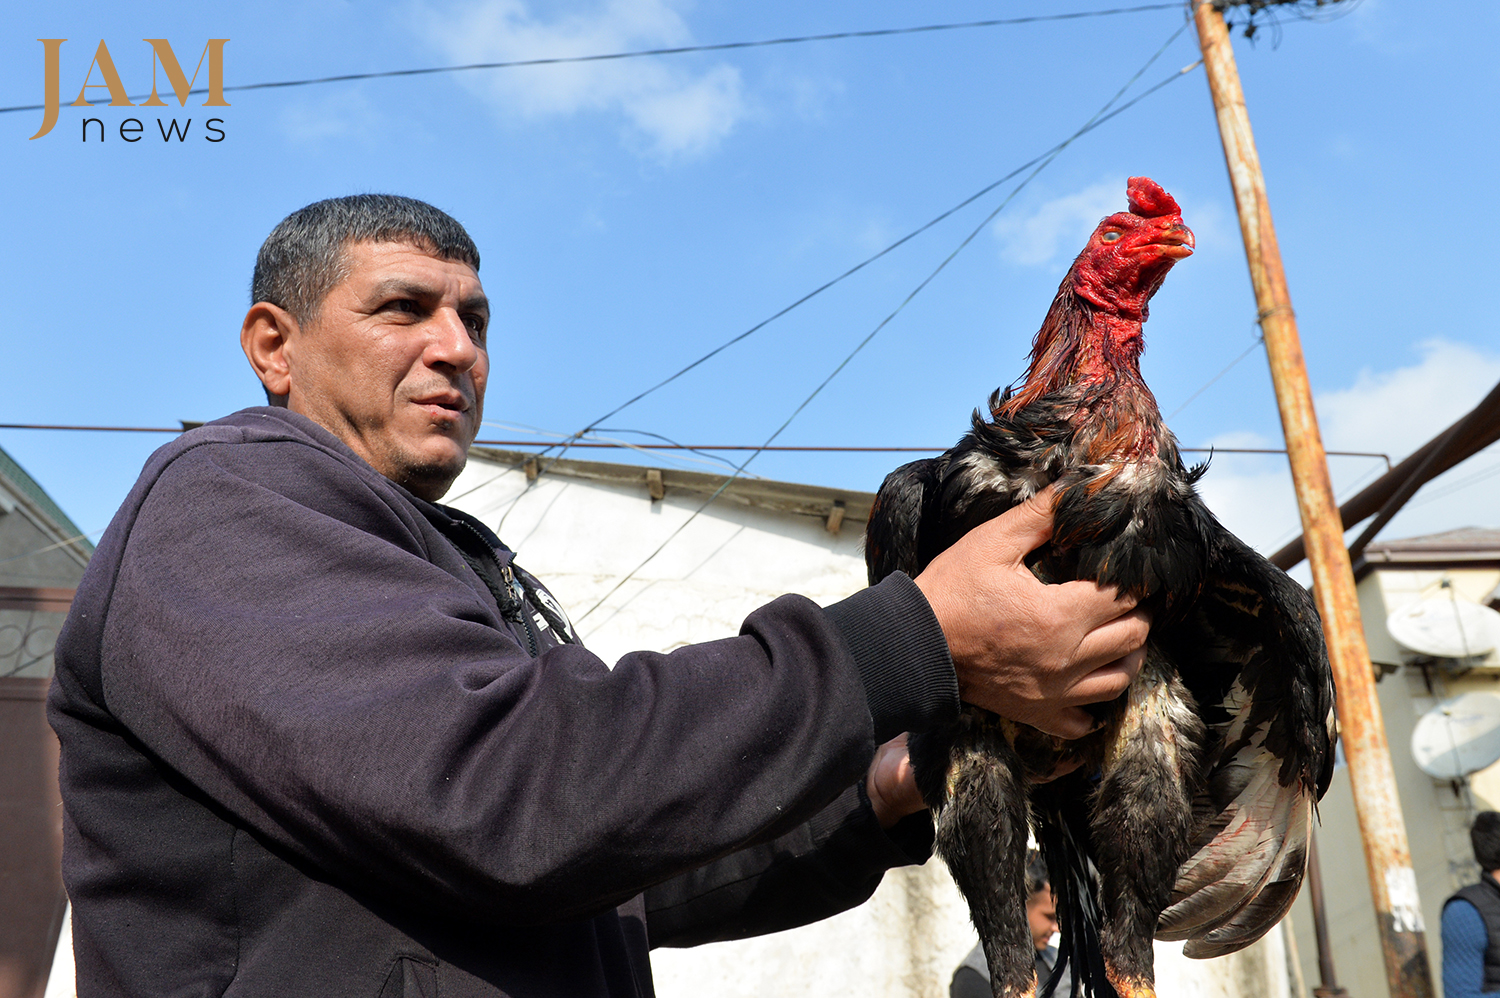 Gamecocks which have been injured during a fight are treated with special oils and medicines. Photo JAMnews. Cockfighting in Azerbaijan